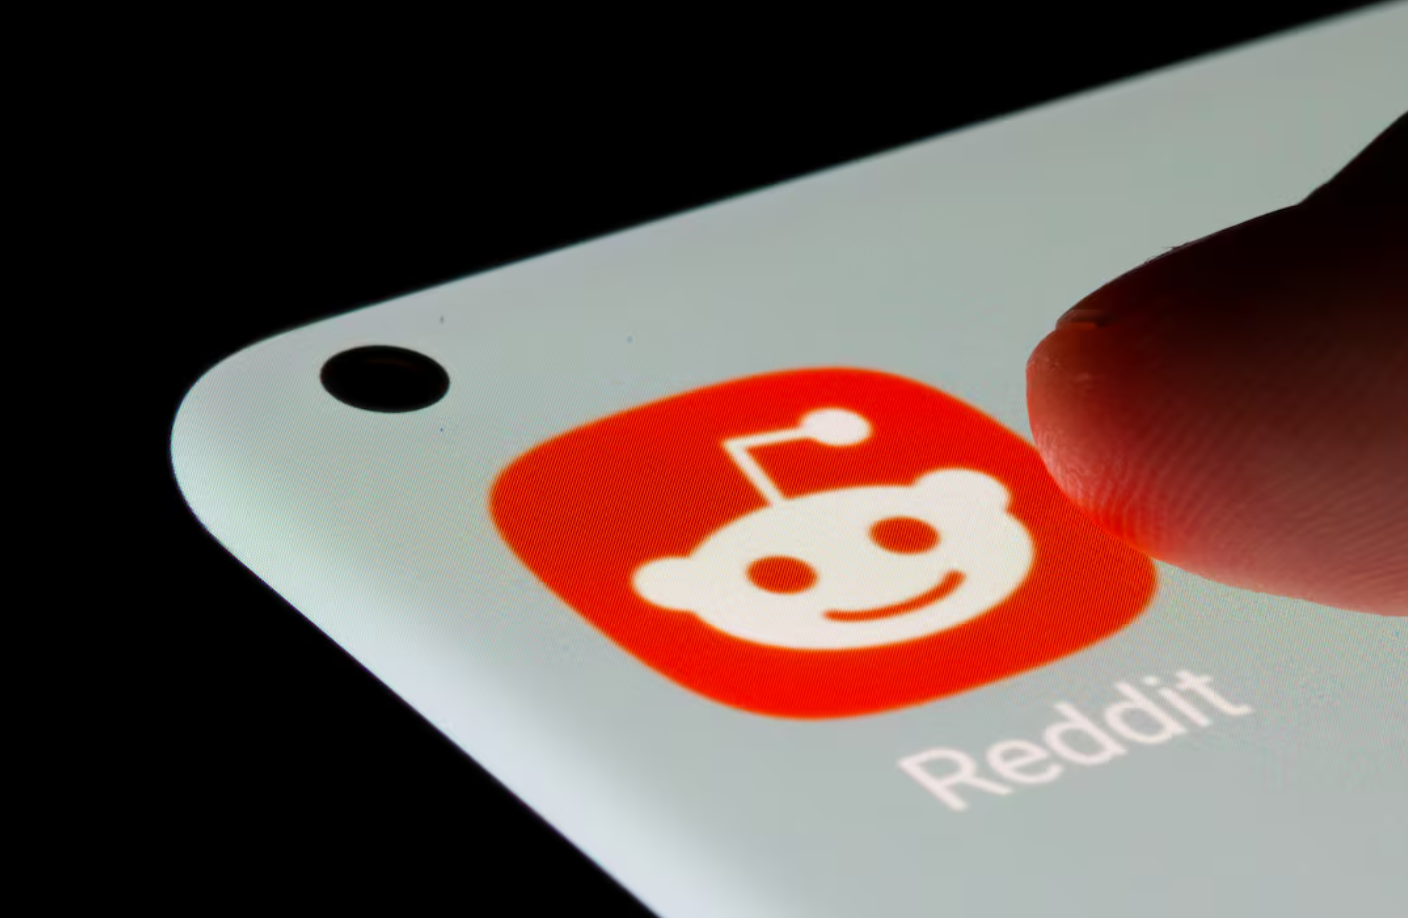 Exclusive: Reddit’s IPO as much as five times oversubscribed, sources say